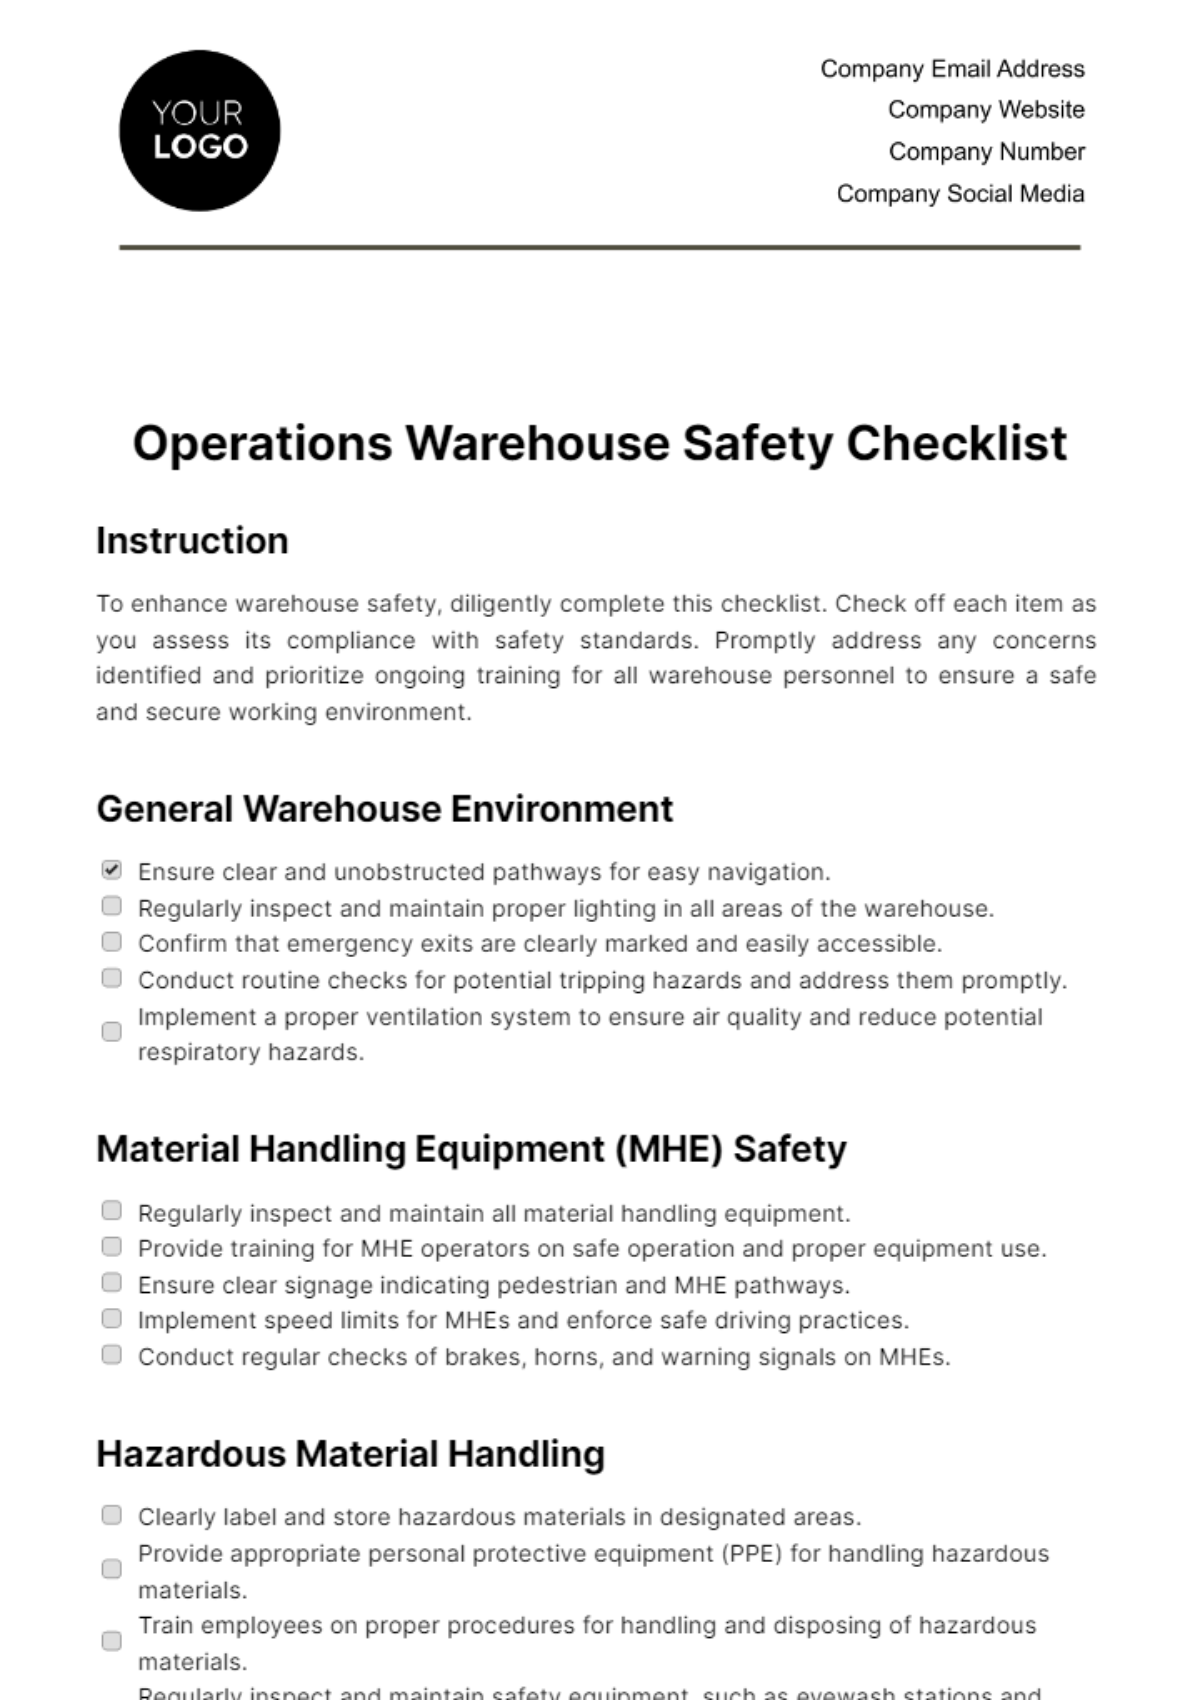 Operations Warehouse Safety Checklist Template